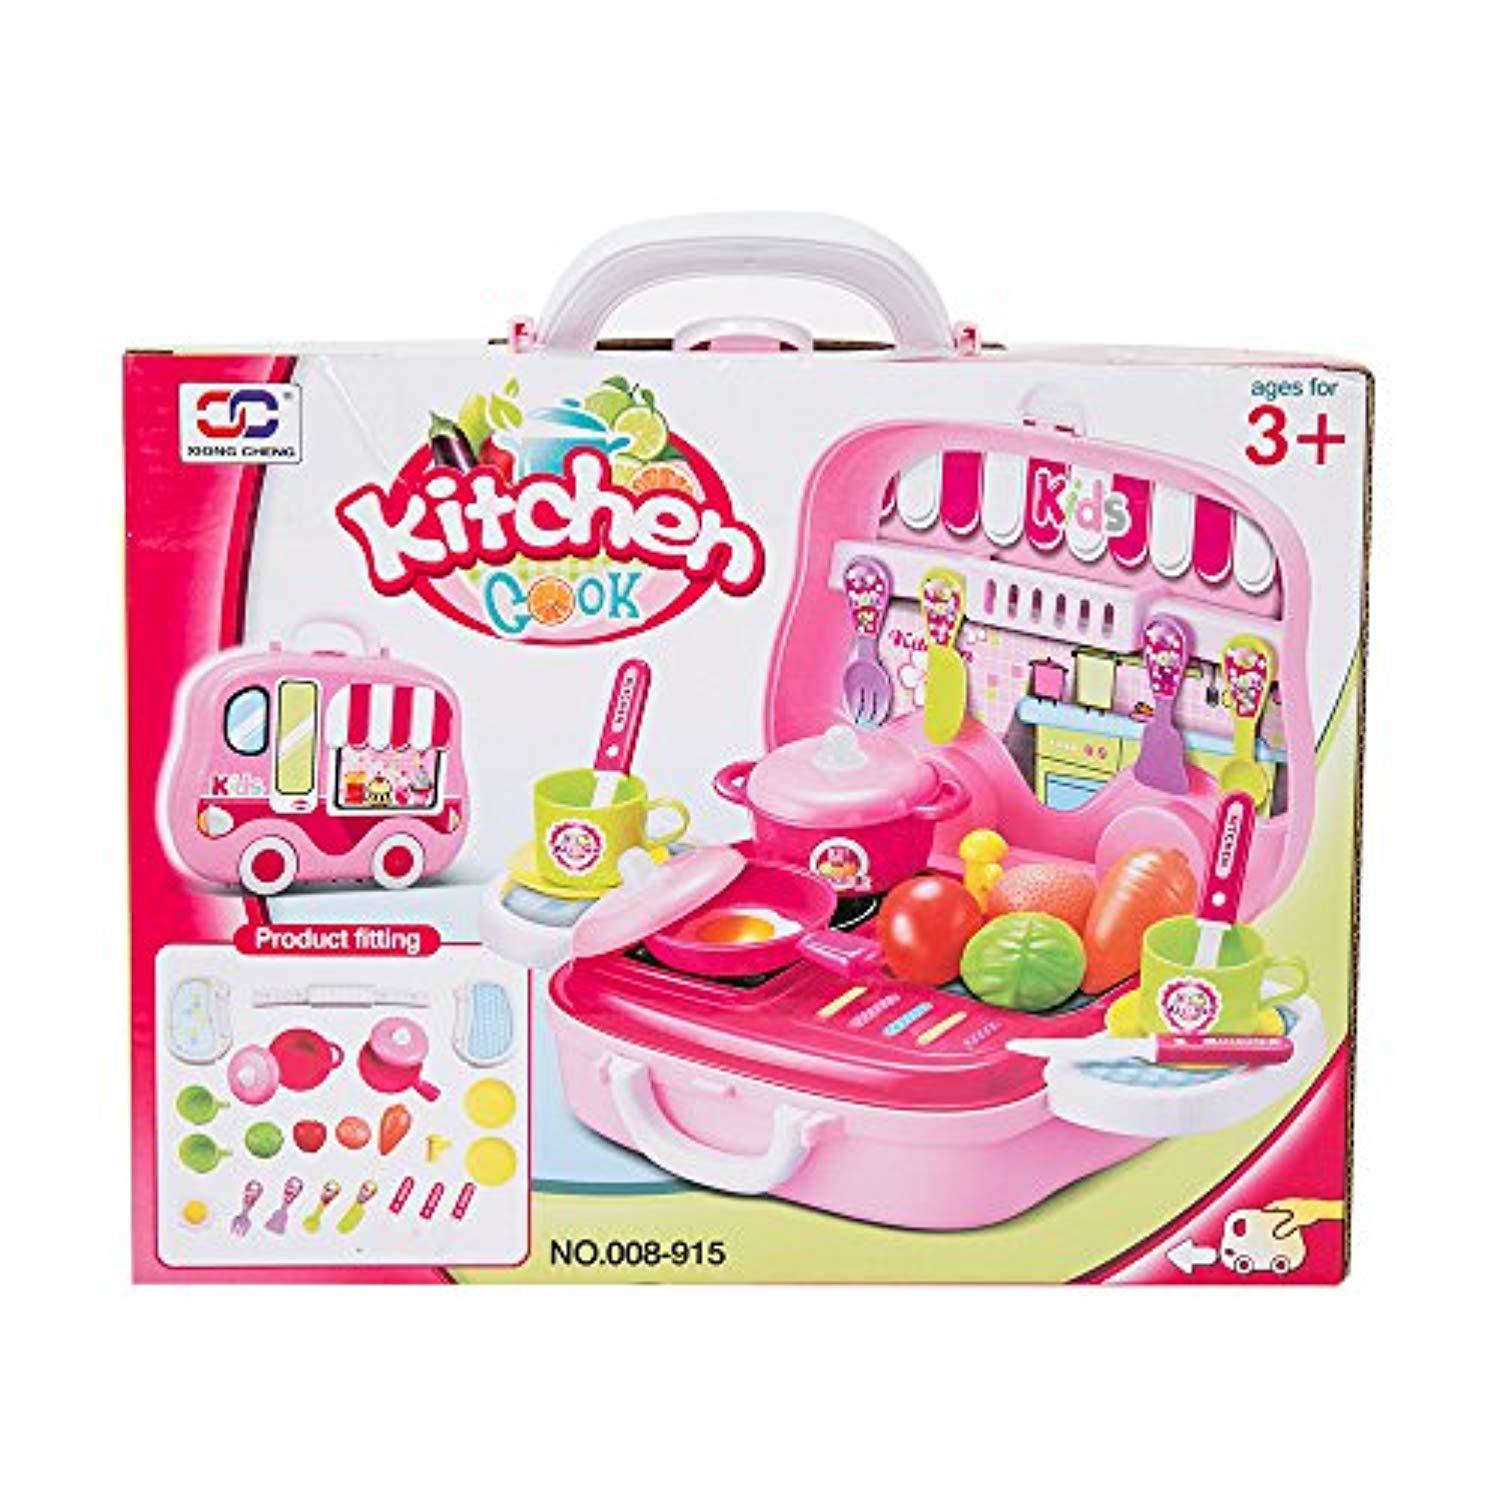 Bosonshop Plastics Pretend Play Kitchen Food Kit with Stove and Vegetables